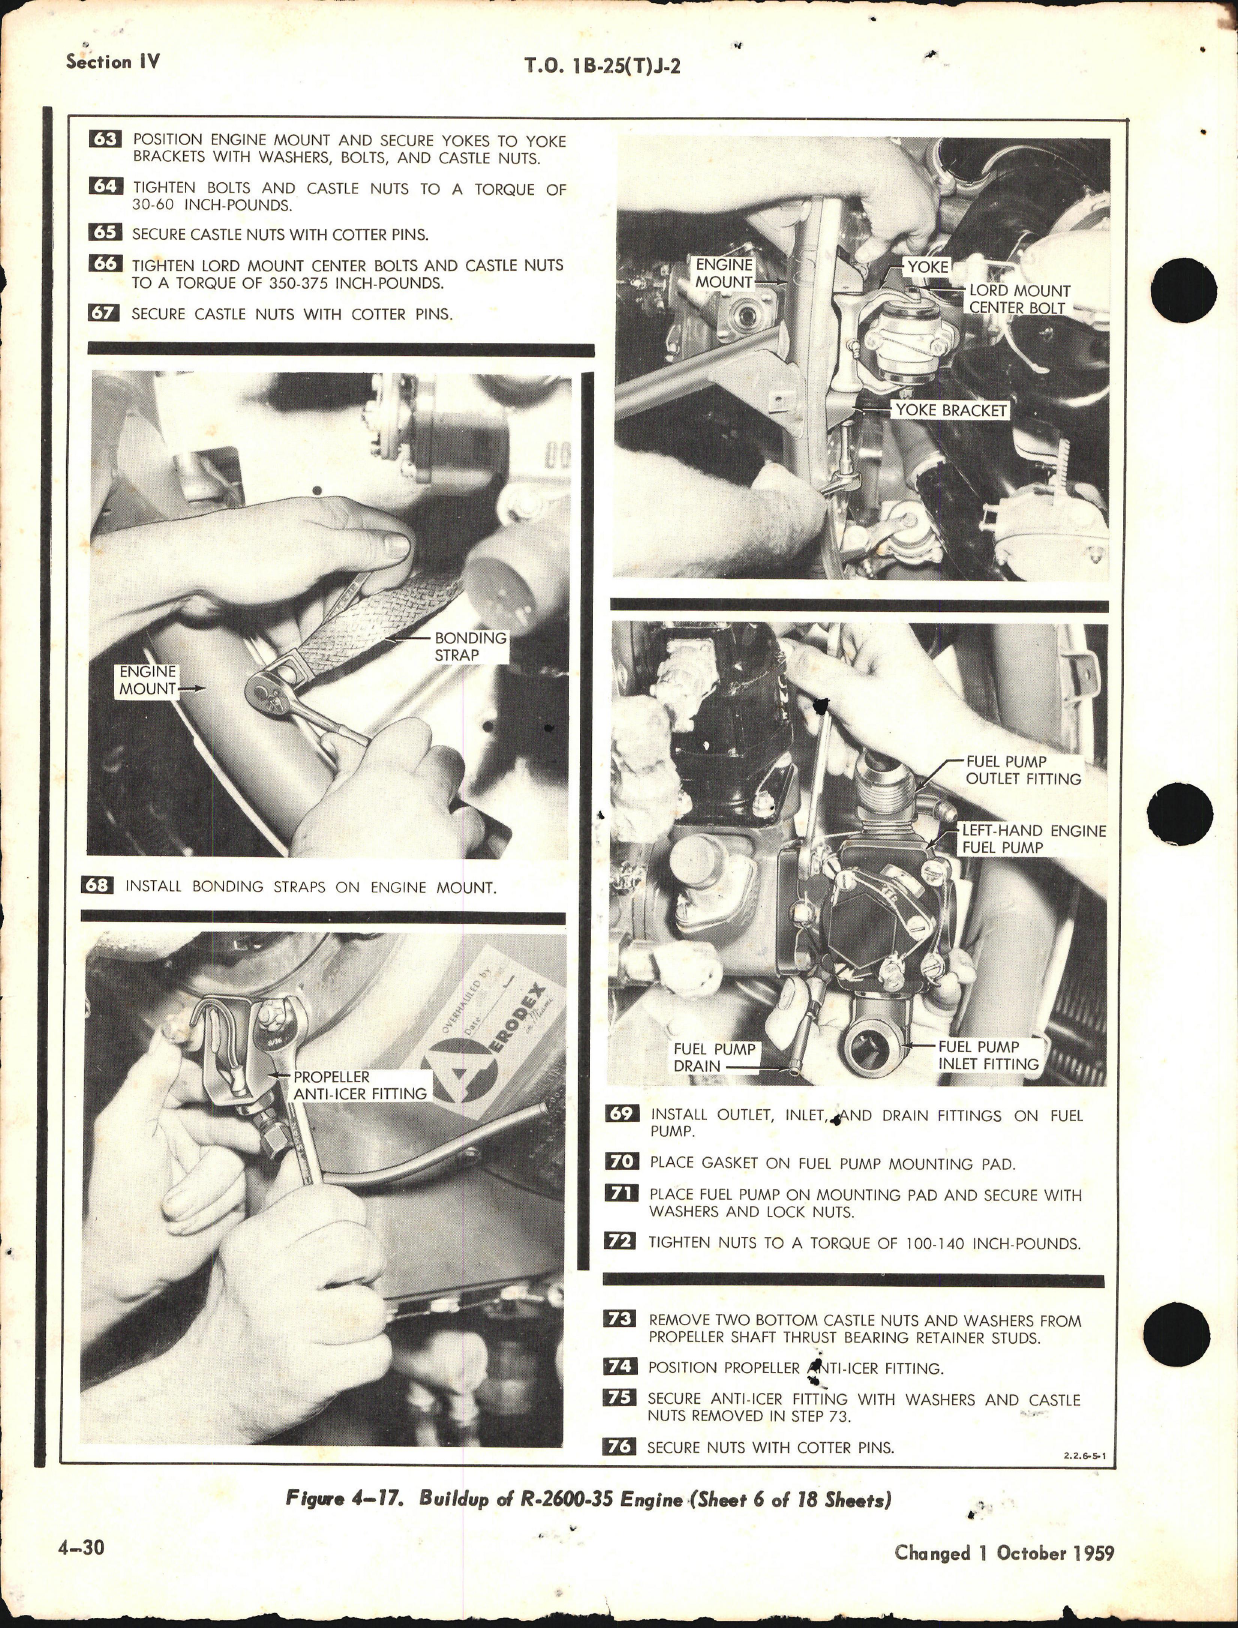 Sample page 6 from AirCorps Library document: Organizational Maintenance For B-25J, TB-25J, TB-25L, TB-25L-1, and TB-25N